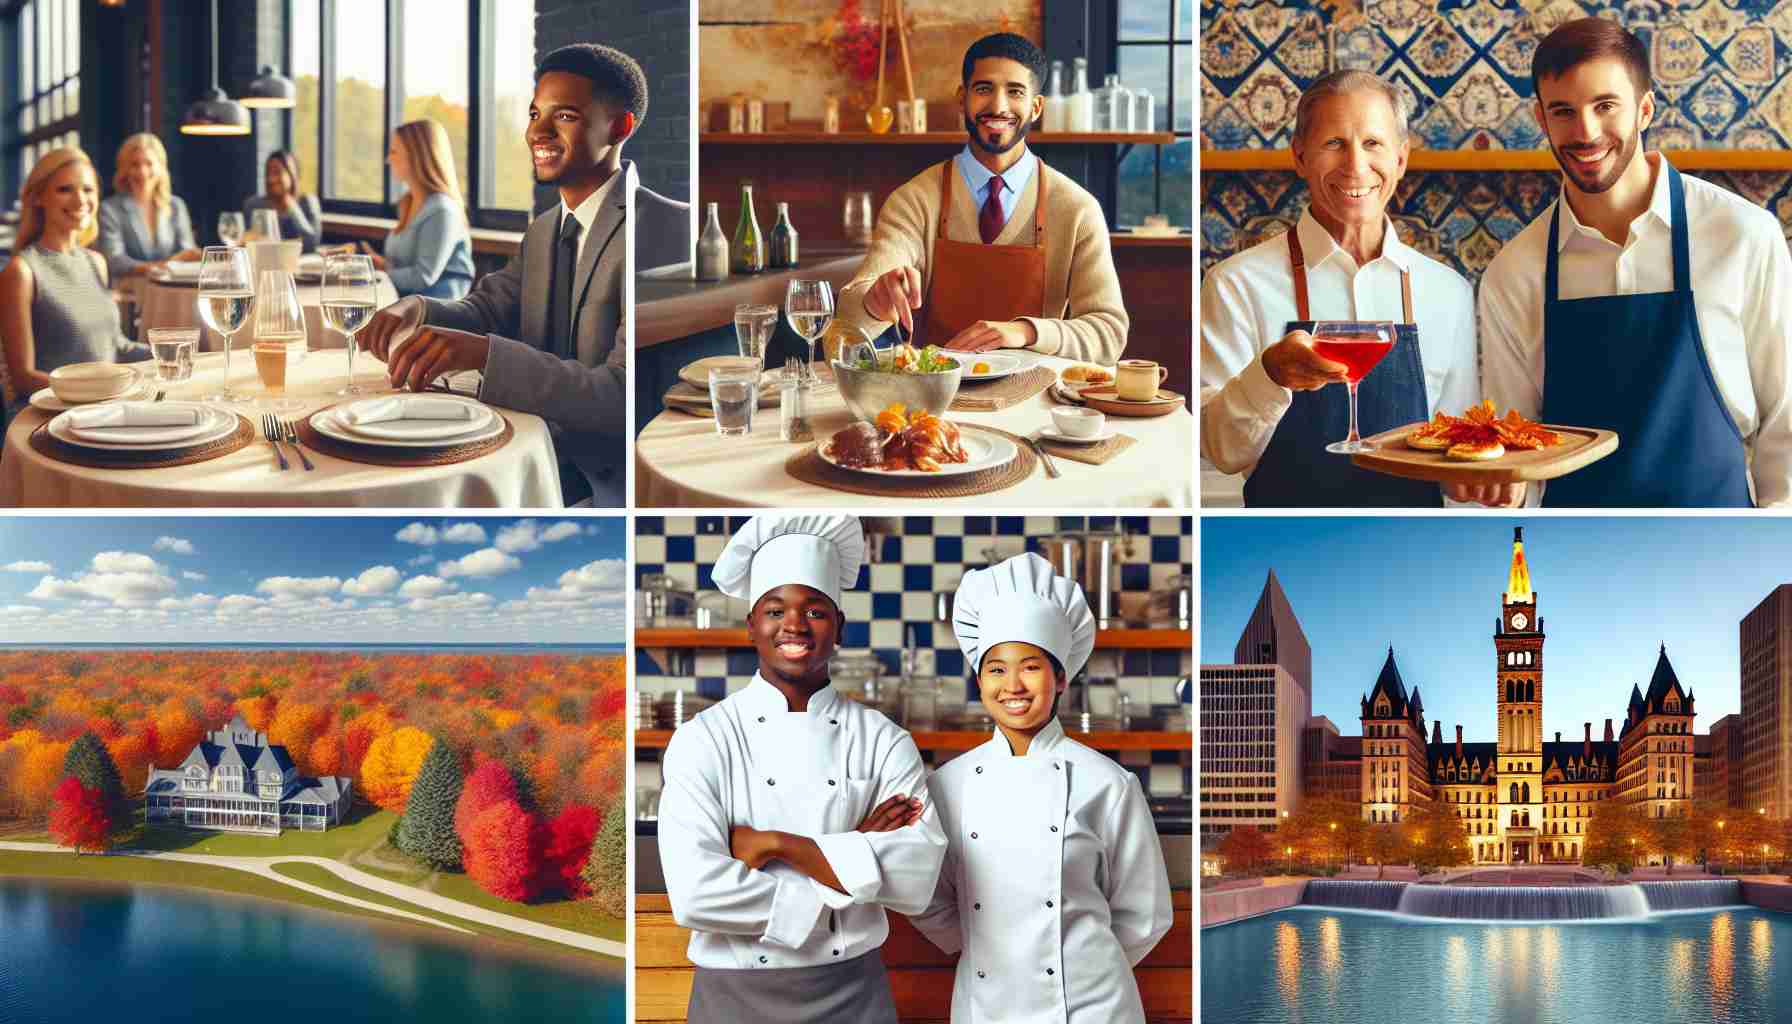 A realistic, high-definition image showcasing Michigan's hospitality gems. Include beautifully set tables at locally-owned restaurants serving regional specialties, charming bed and breakfasts nestled amongst vibrant fall colors and stunning lake views, and boutique hotels that offer a sophisticated urban vibe. Show also some friendly staff members of diverse descents and genders in the scene, like a Middle-Eastern male receptionist, a Hispanic female server, and a Black male housekeeper, providing exceptional service and hospitality.